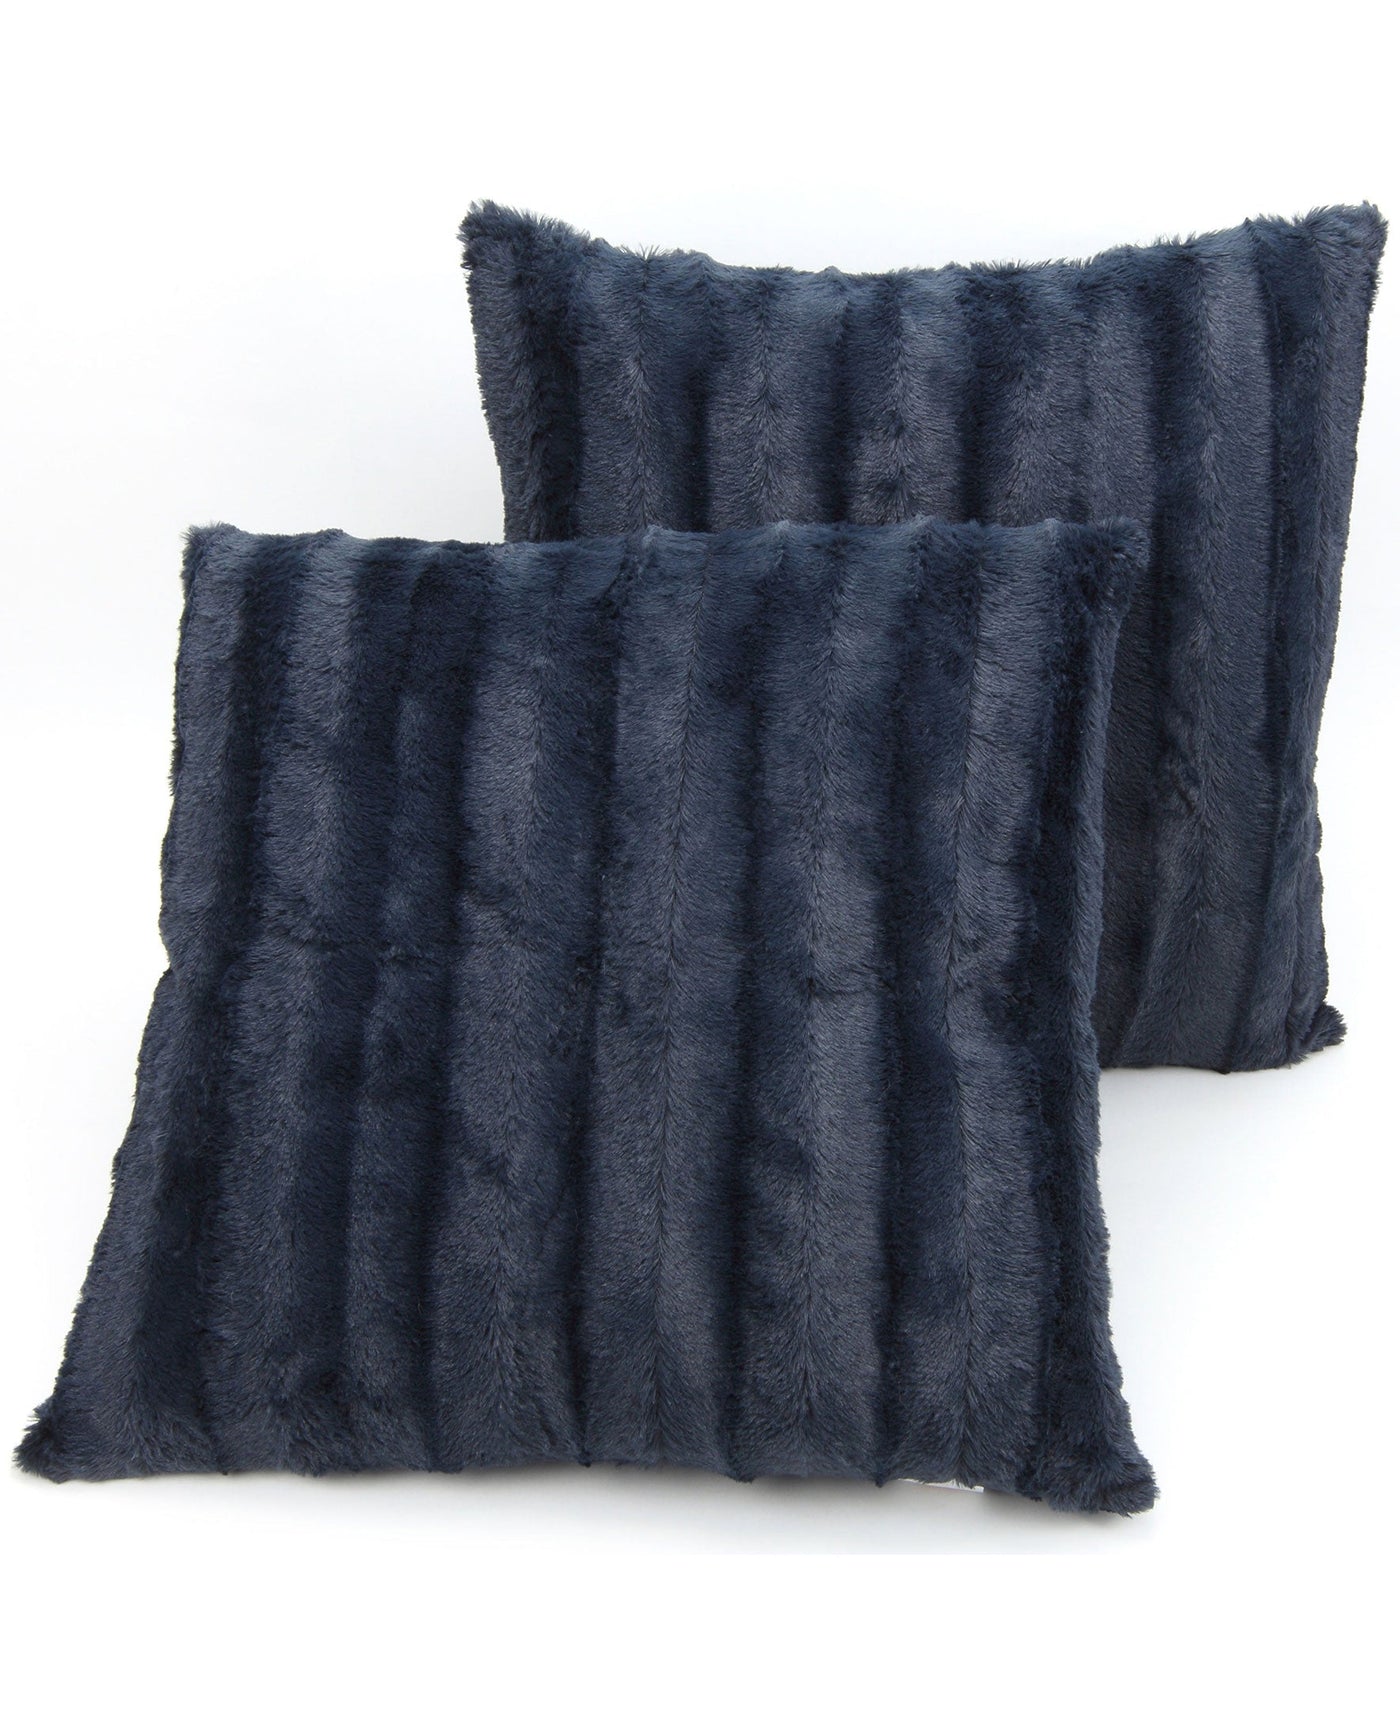 https://www.cheercollection.com/cdn/shop/products/cheer-collection-faux-fur-throw-pillows-set-of-2-decorative-couch-pillows-26-x-26-584023_1400x.jpg?v=1671780487